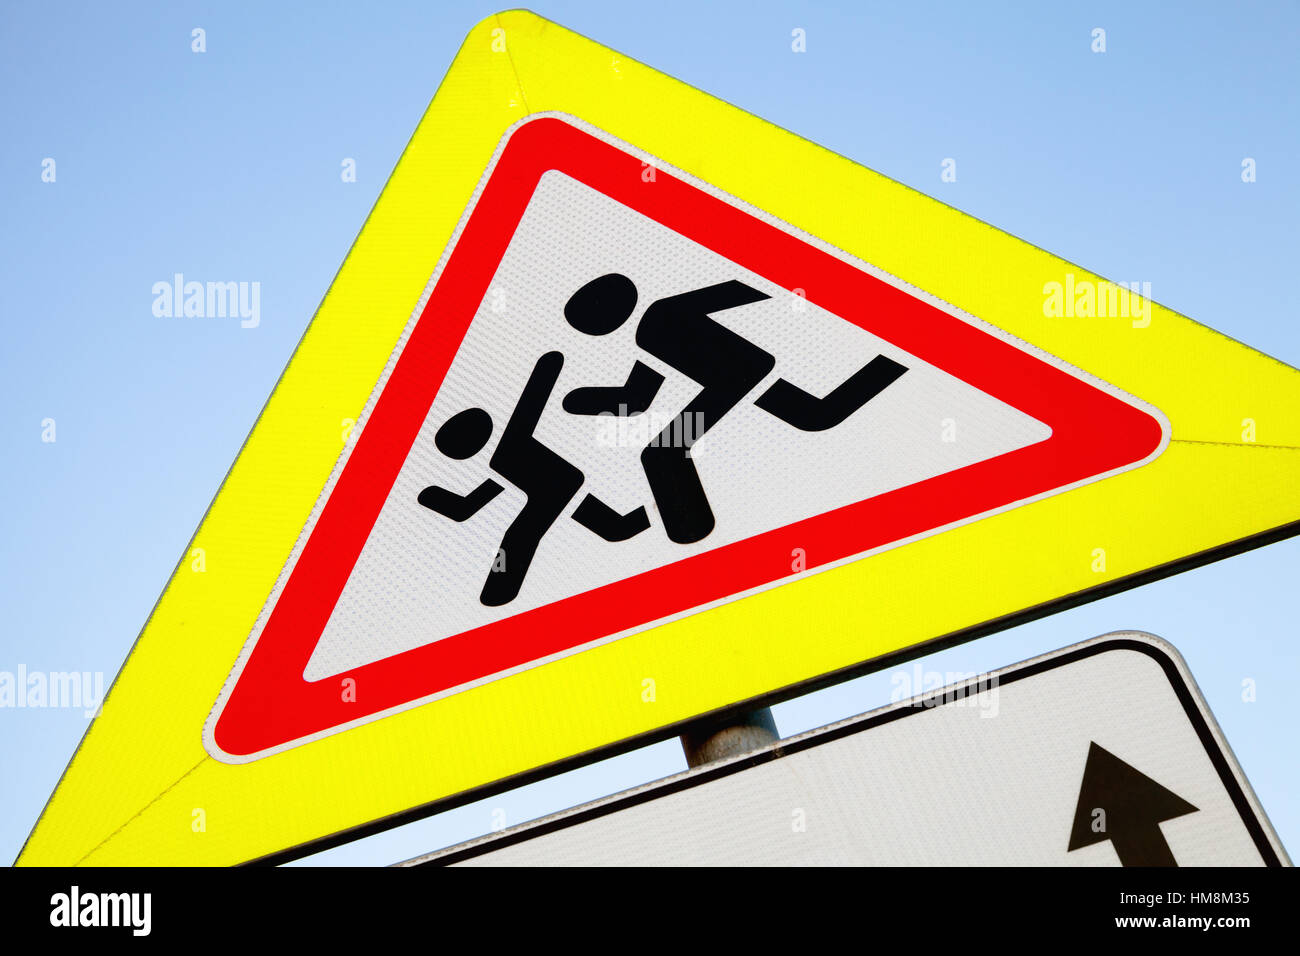 Caution children, Road sign in yellow frame over bright blue sky background Stock Photo